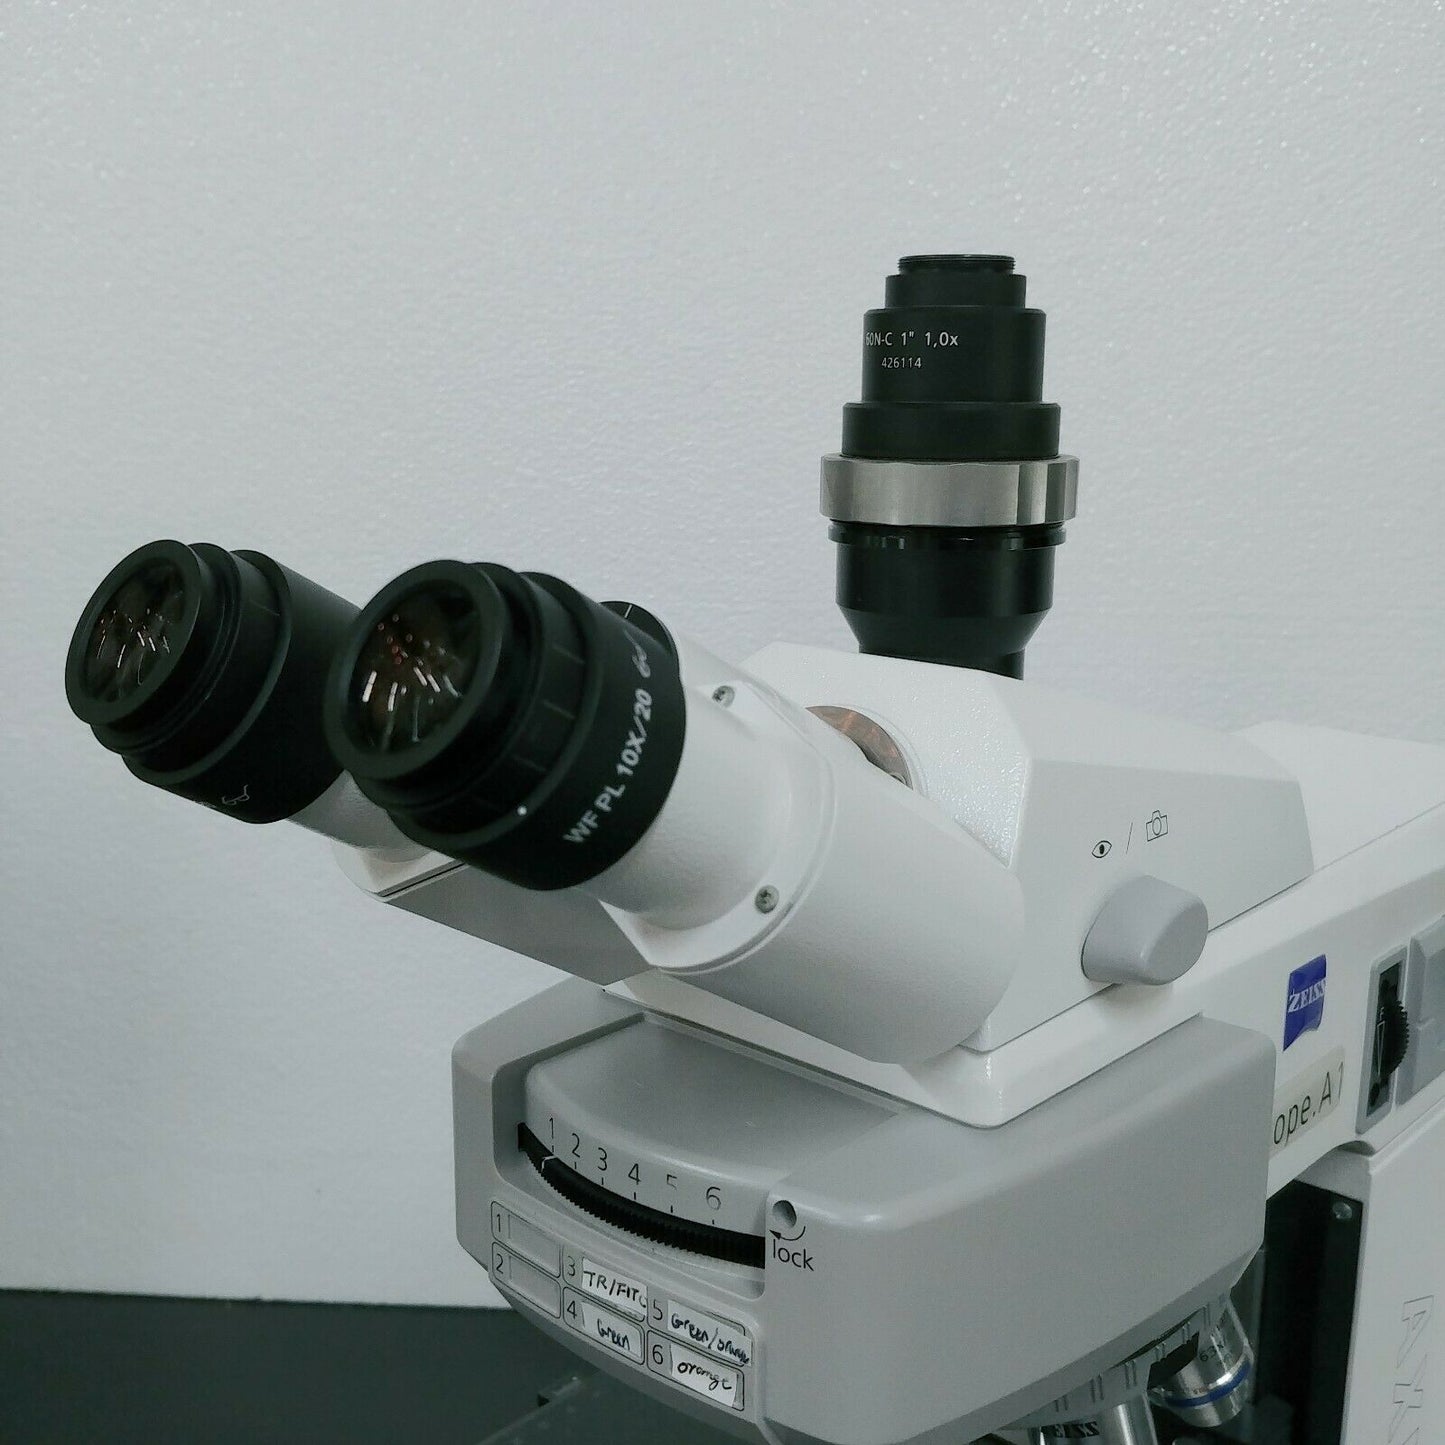 Zeiss Microscope AXIO Scope.A1 with Fluorescence - microscopemarketplace